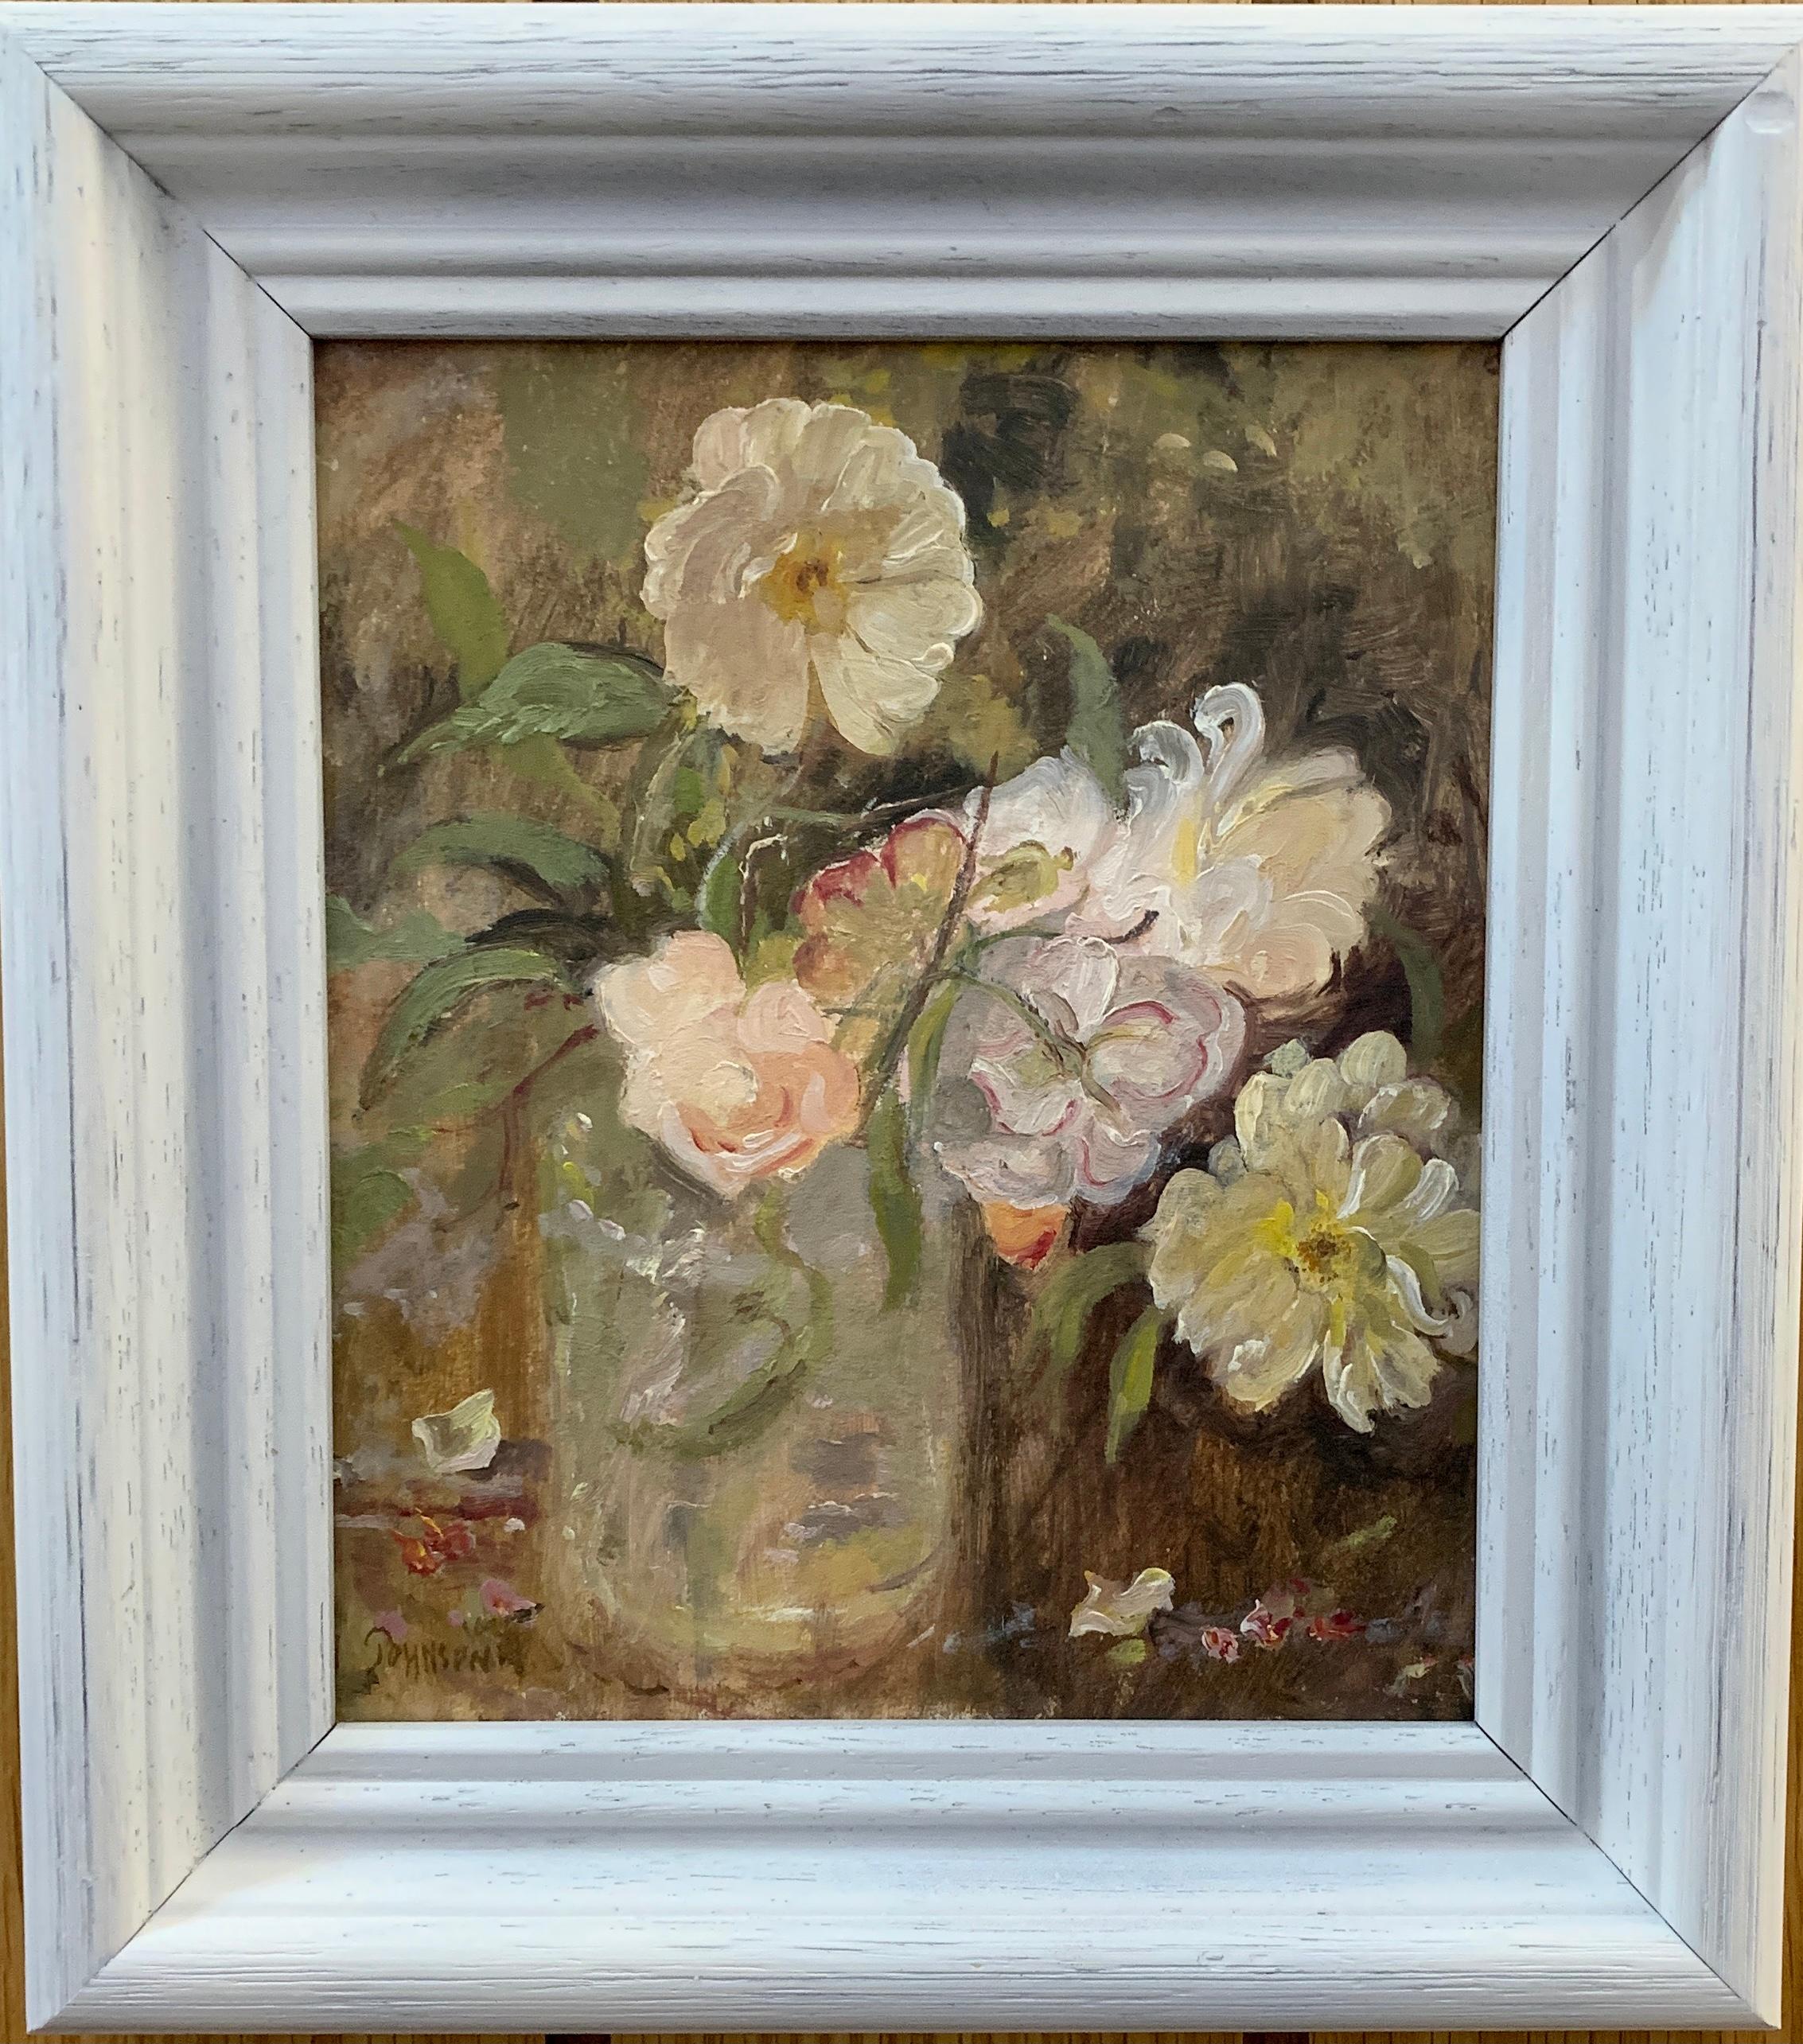 Impressionist English 20th century still life of White and yellow flowers